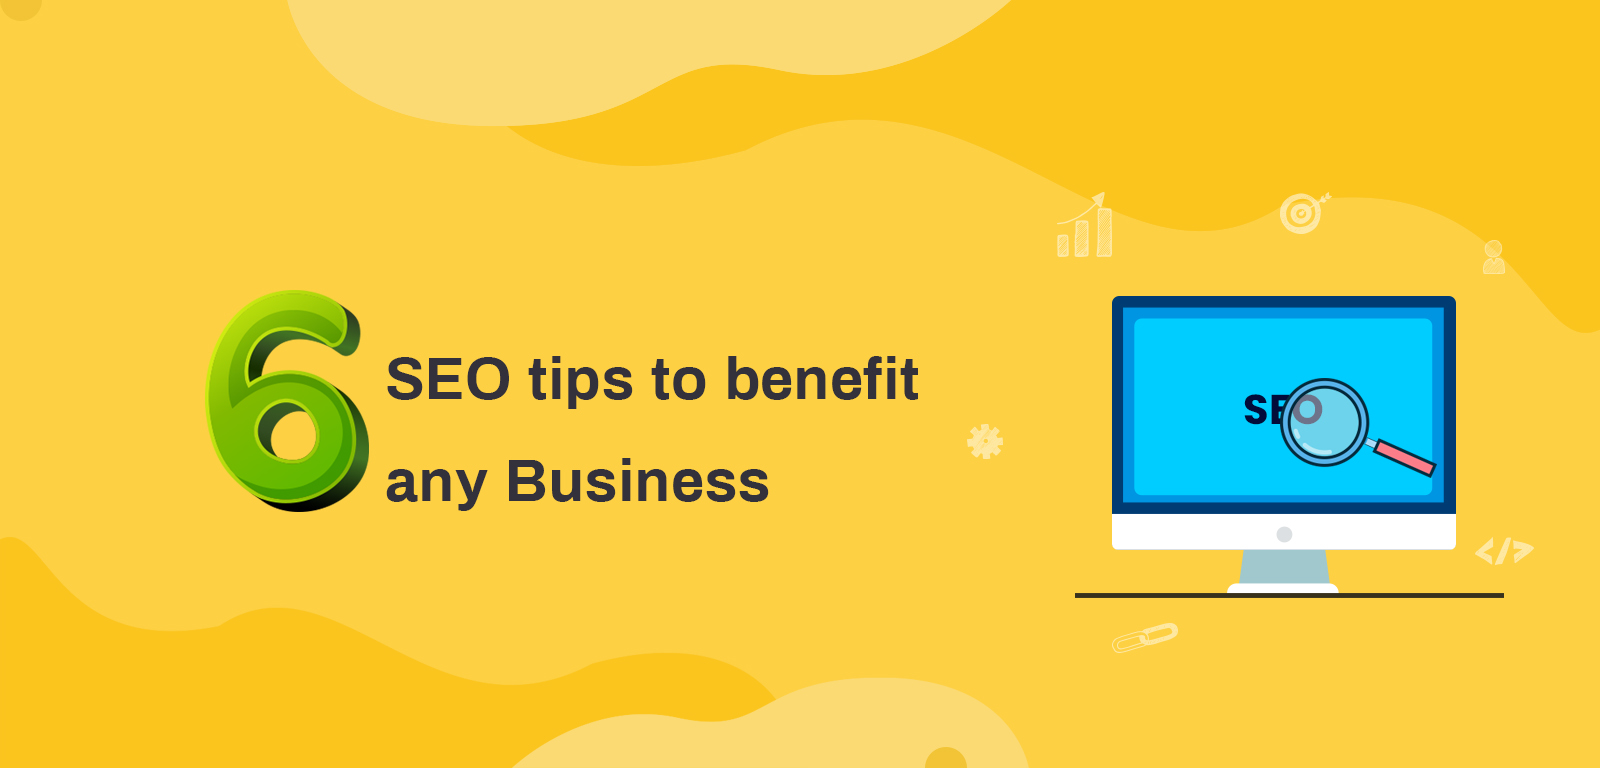 6 SEO TIPS TO BENEFIT ANY BUSINESS